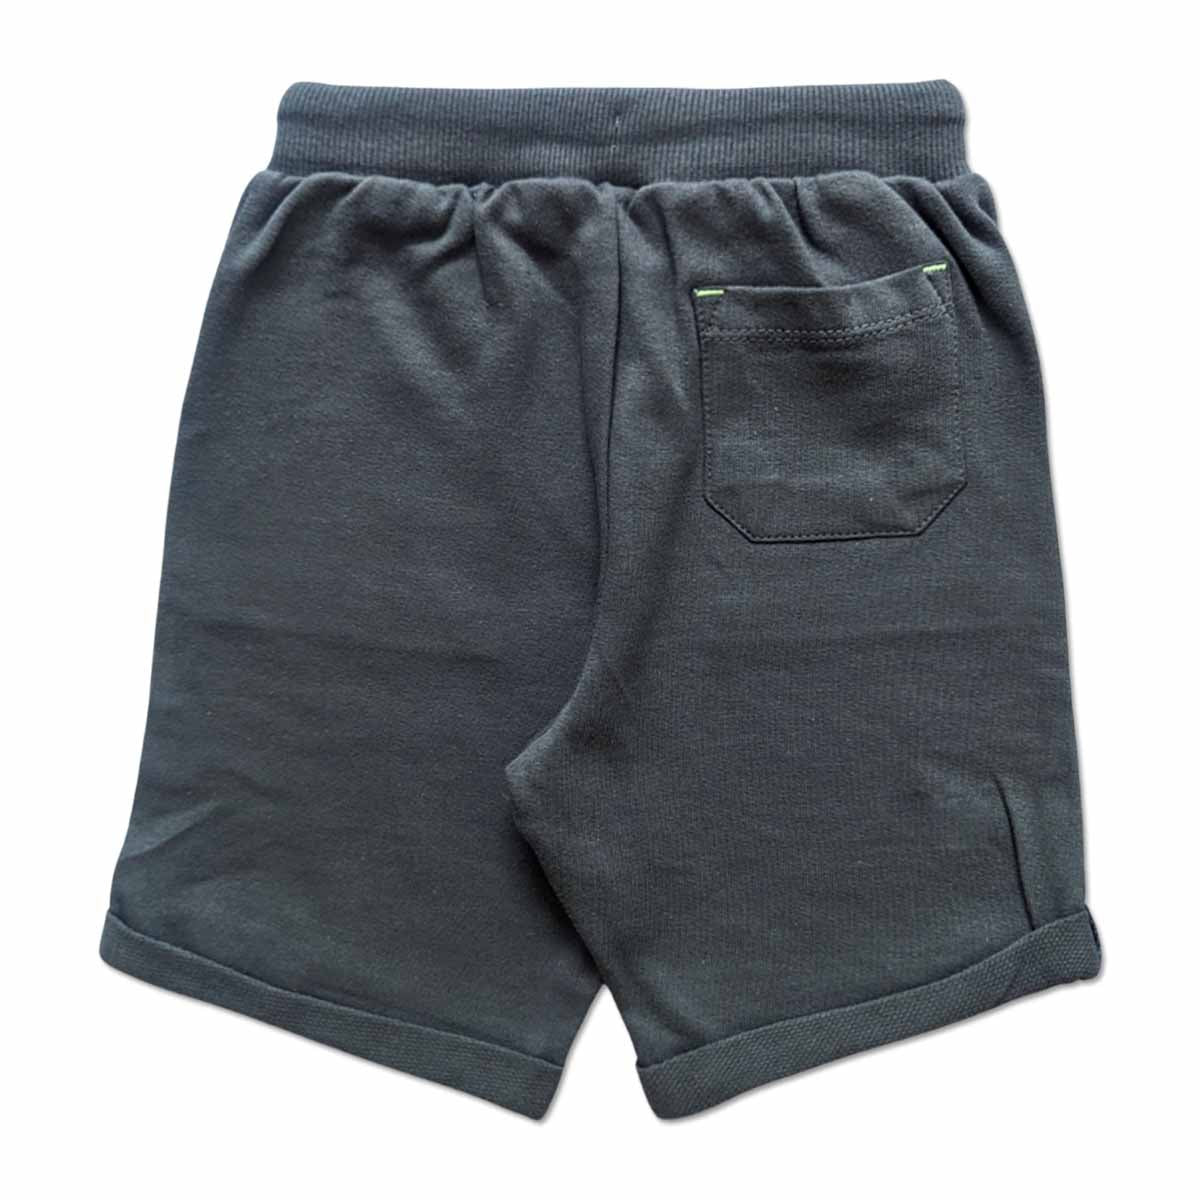 Brand Expo Premium Quality Branded Shorts for Boy's